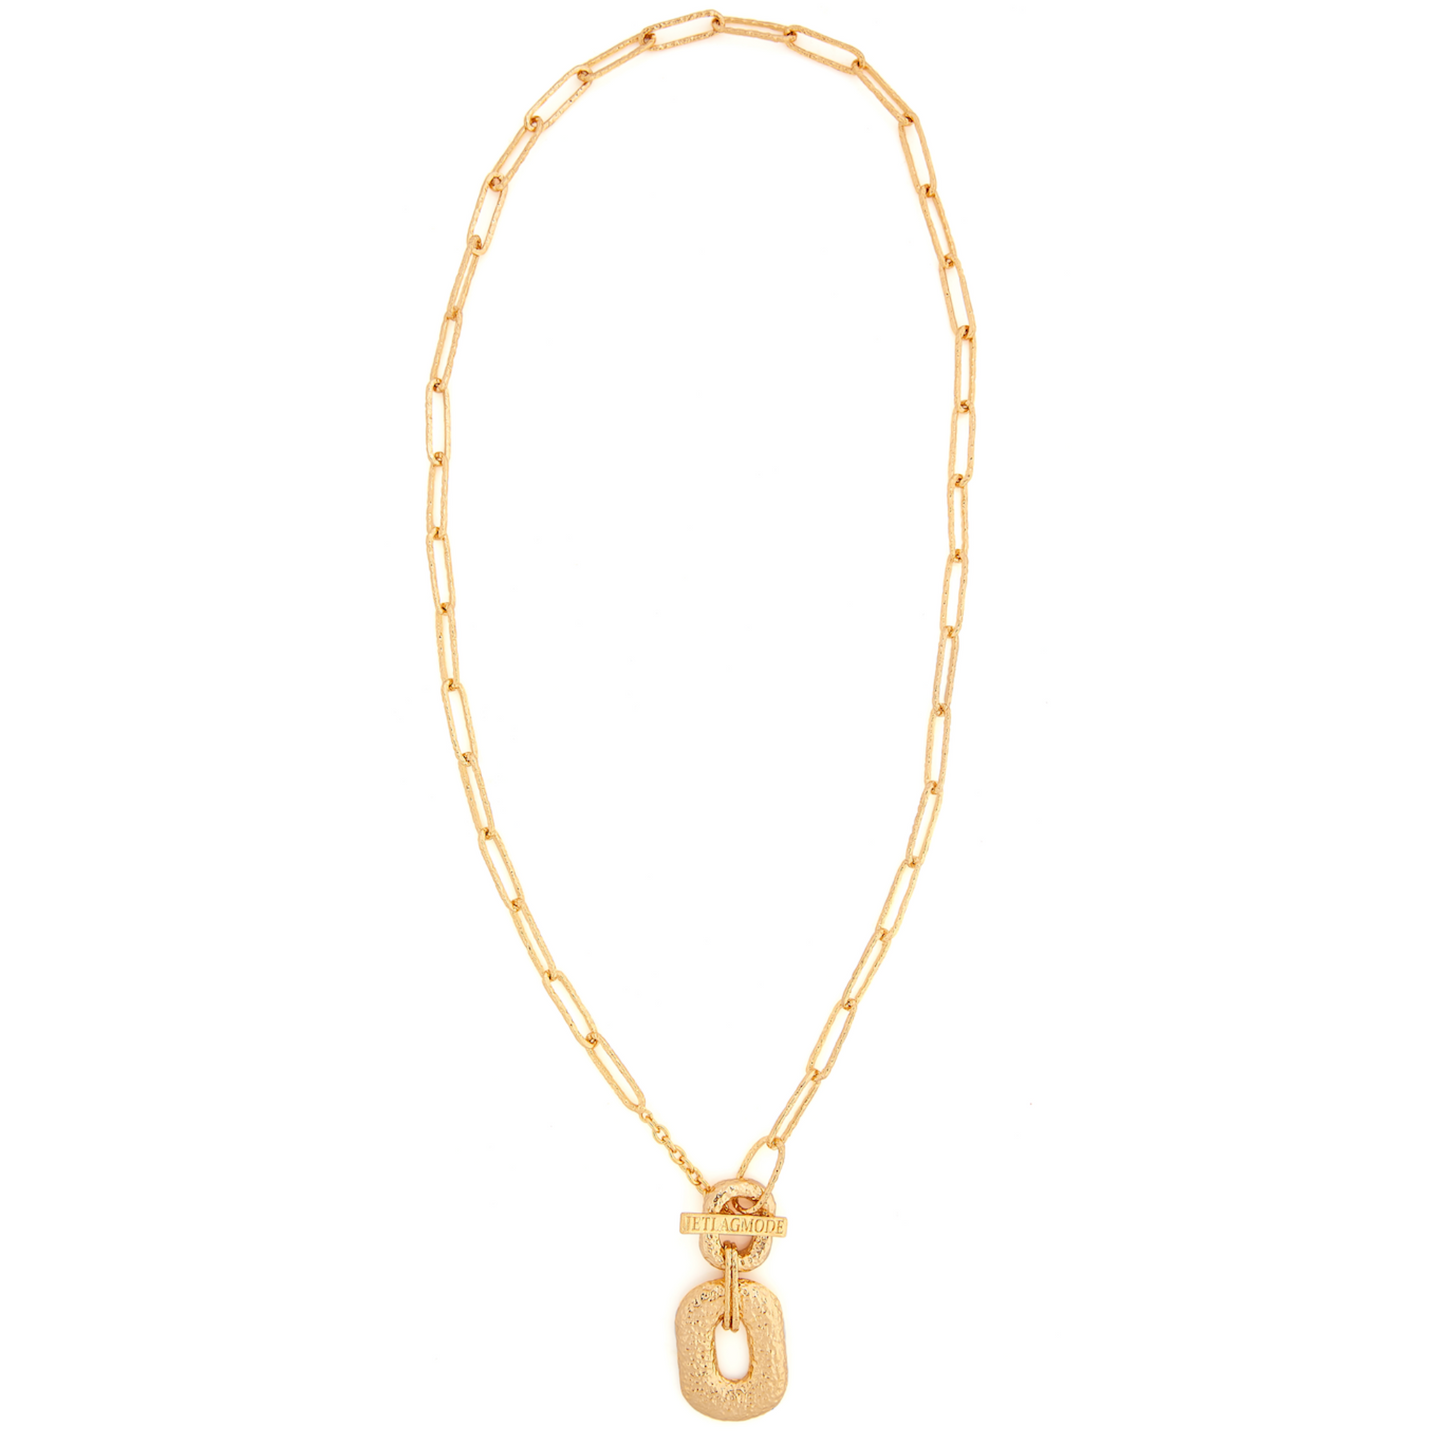 Connection Chain Necklace (Gold)